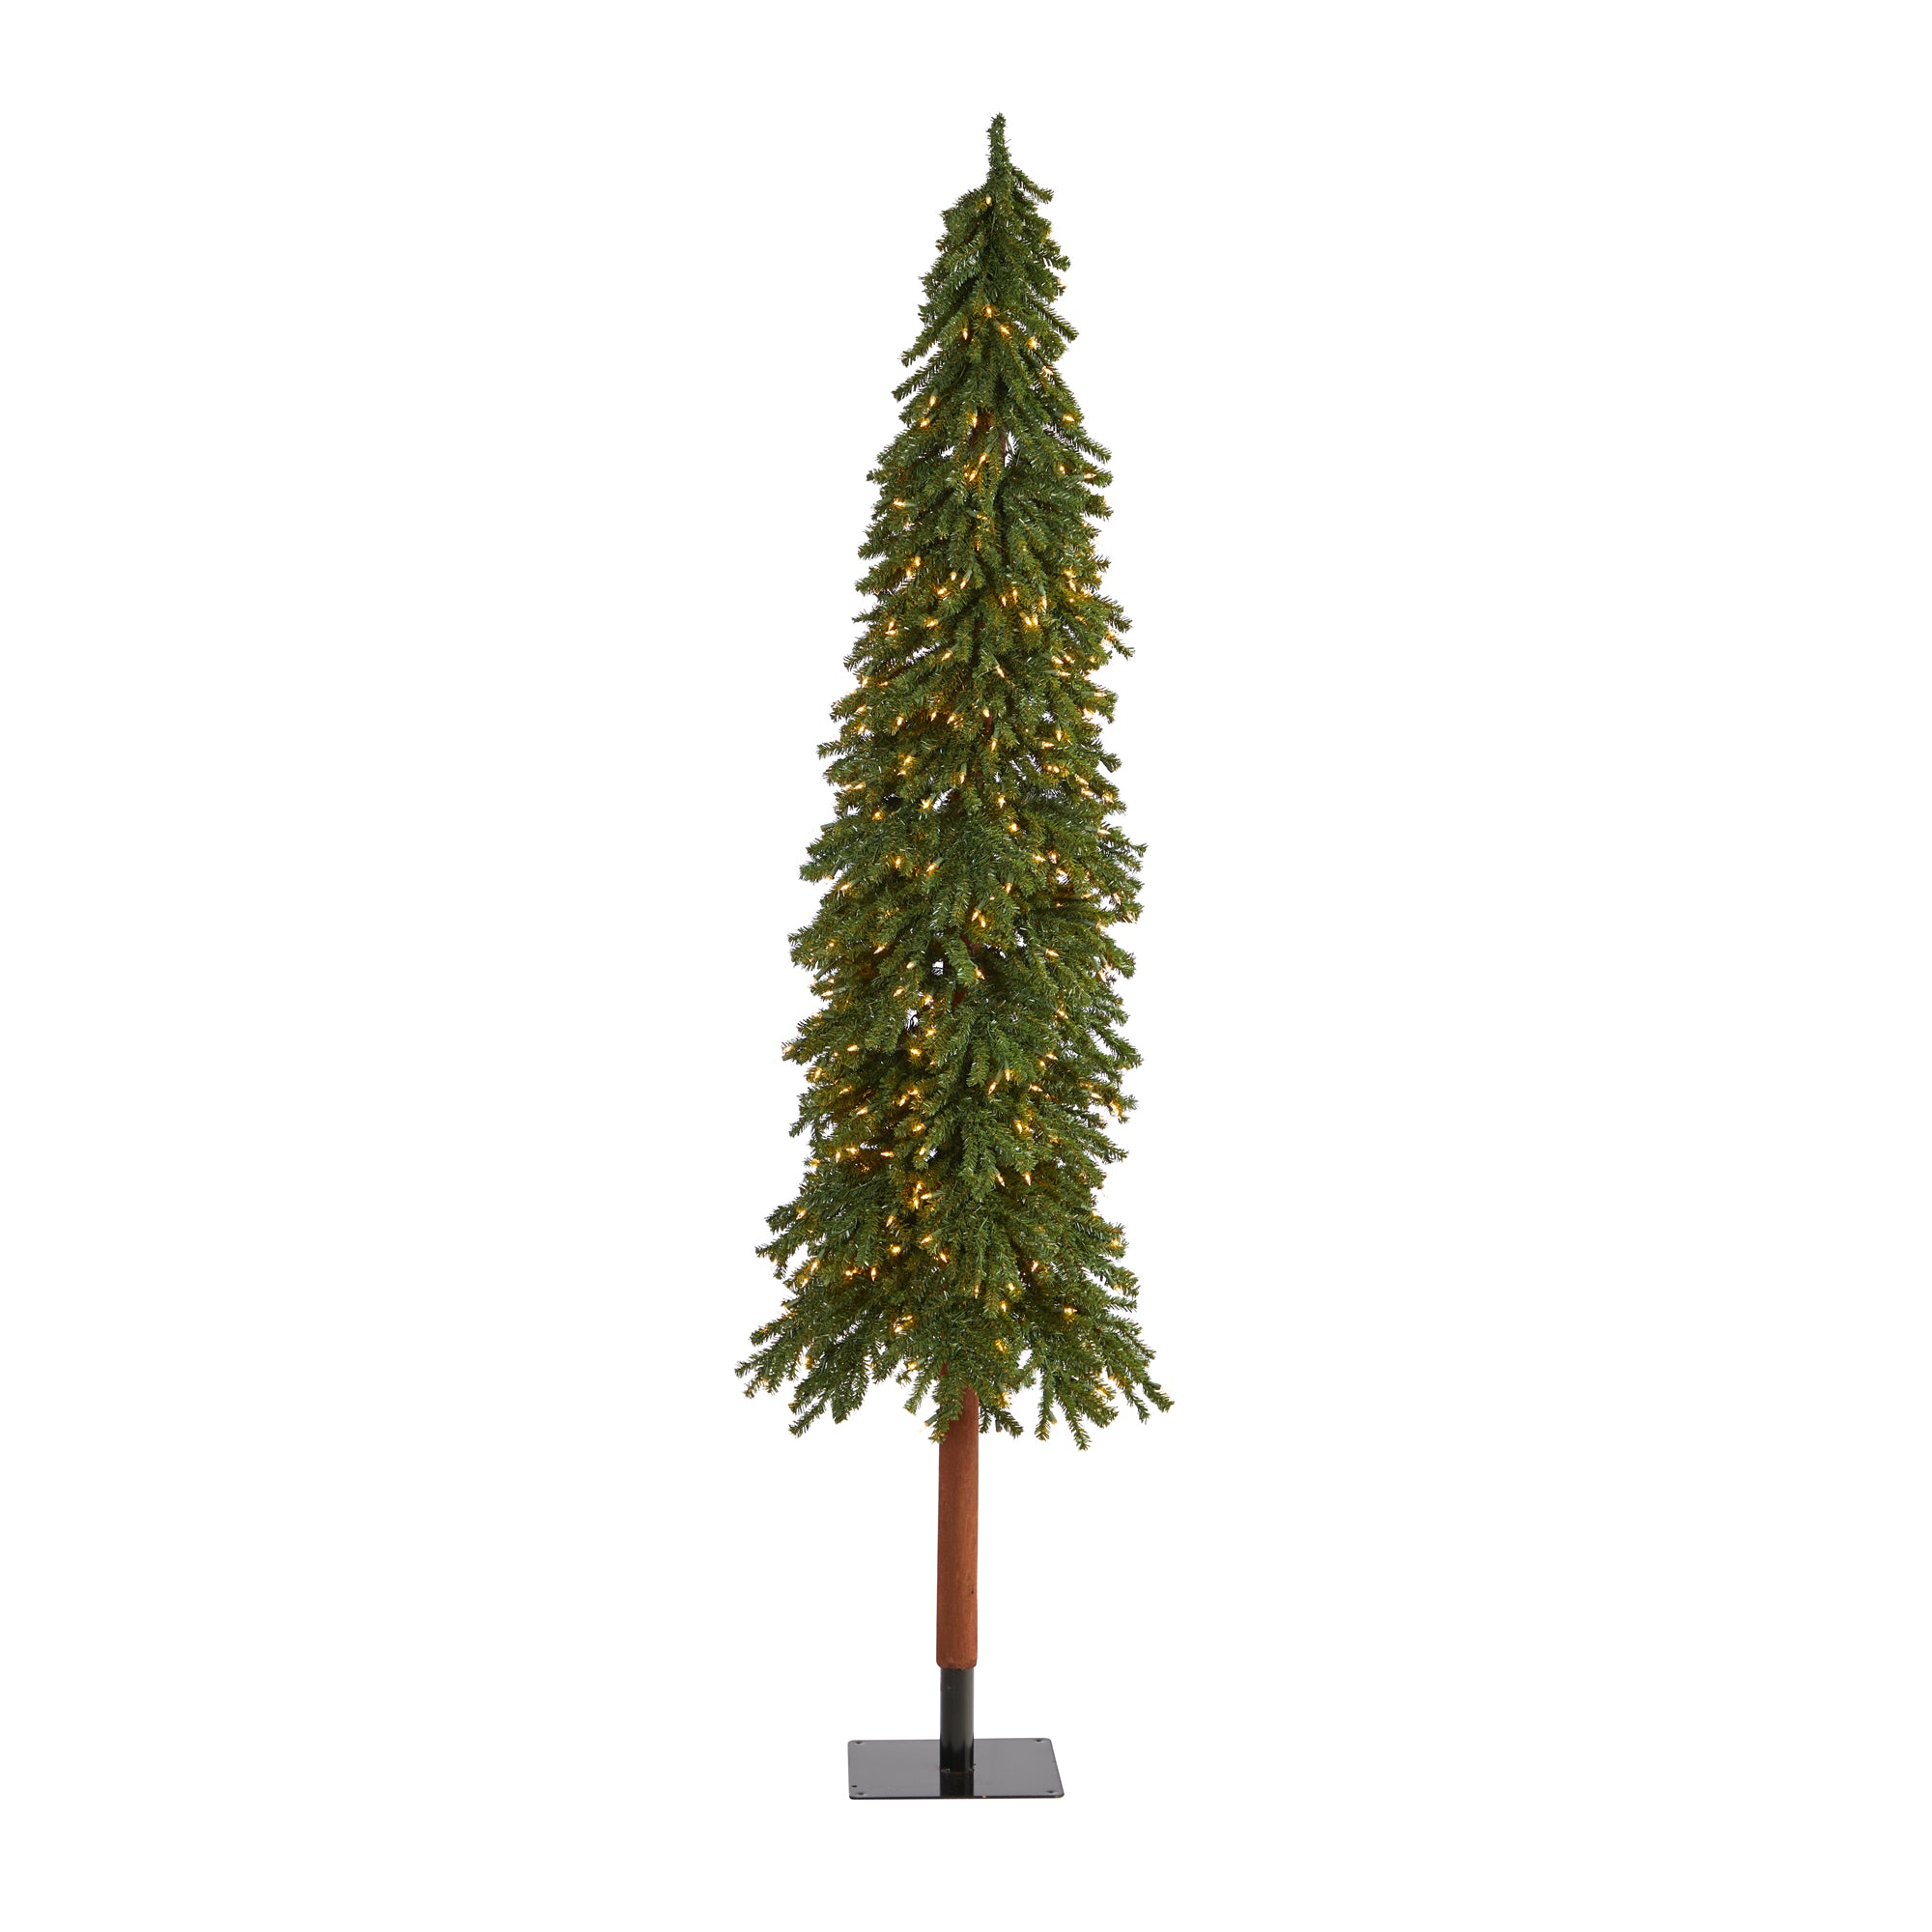 8' Grand Alpine Artificial Christmas Tree with 500 Clear Lights and 1051 Bendable Branches on Natural Trunk